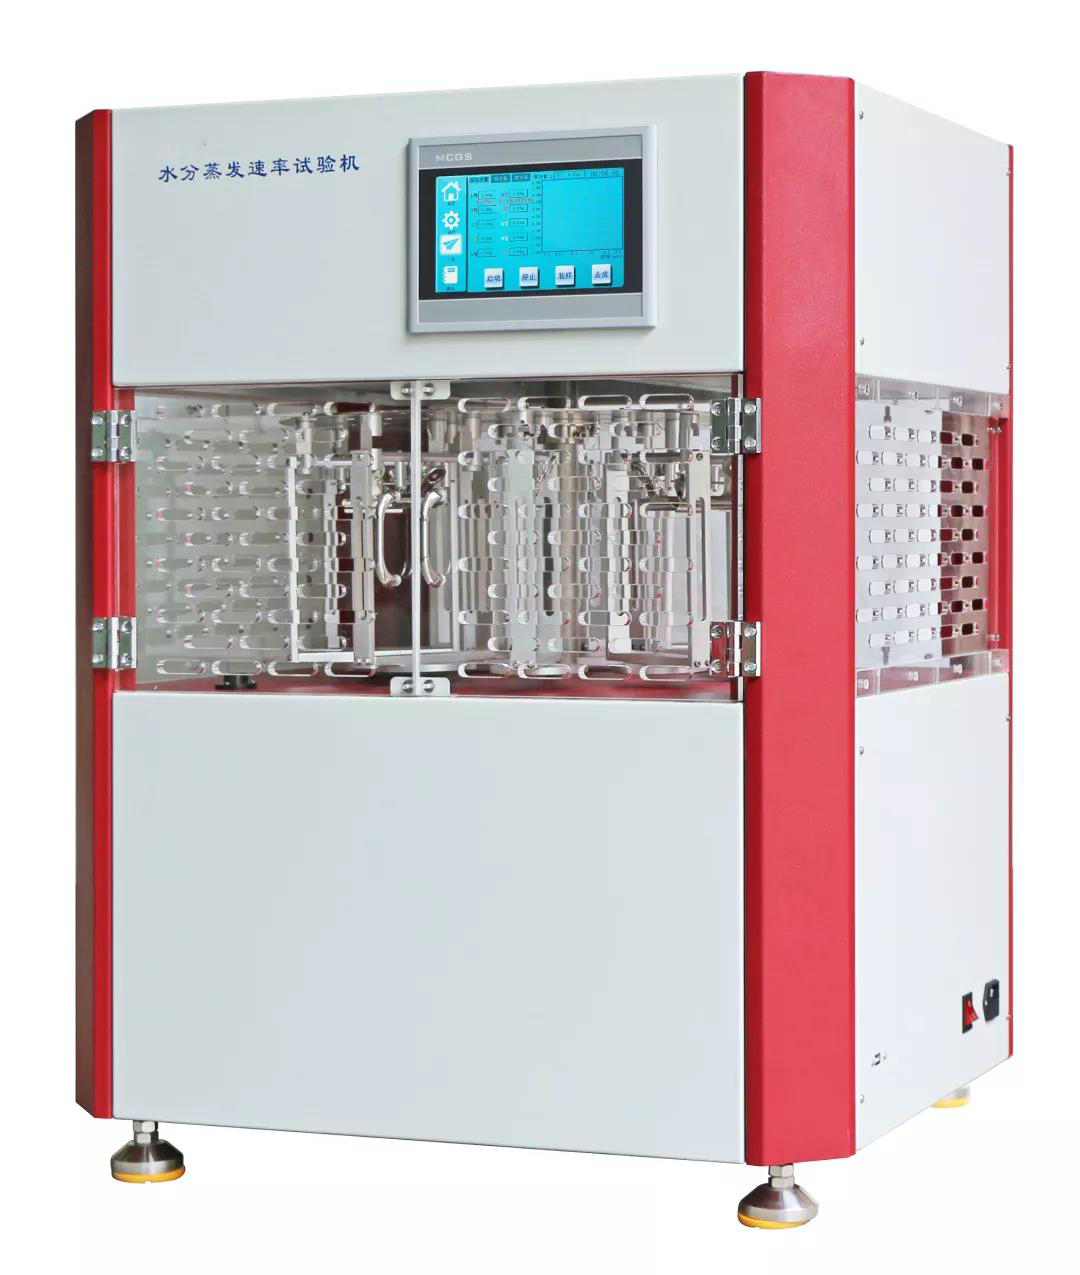 Water evaporation rate tester